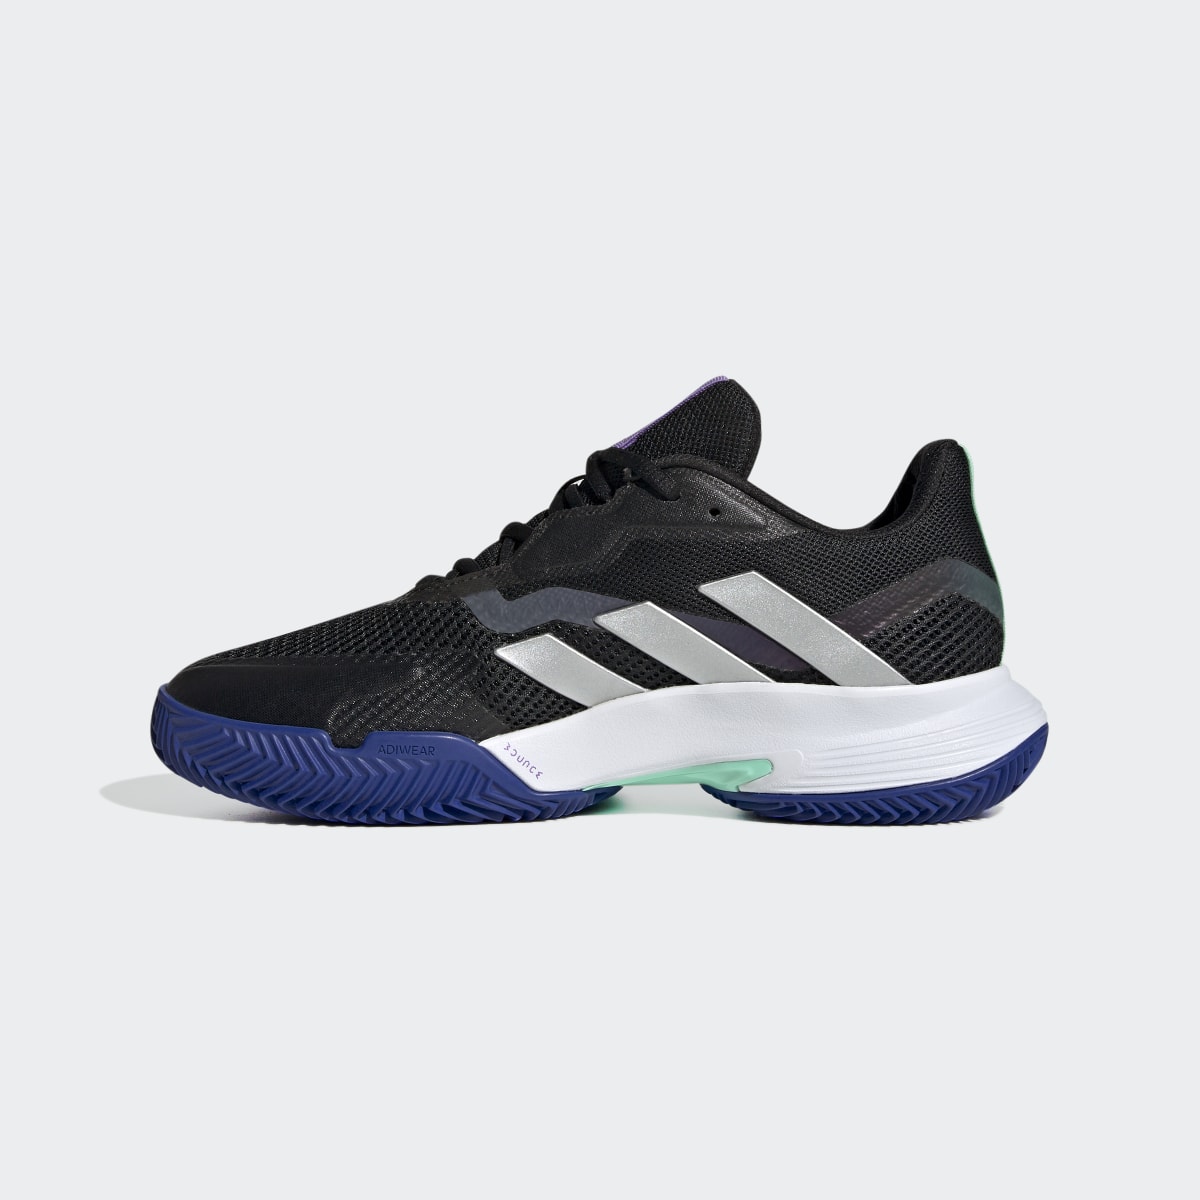 Adidas CourtJam Control Clay Tennis Shoes. 7